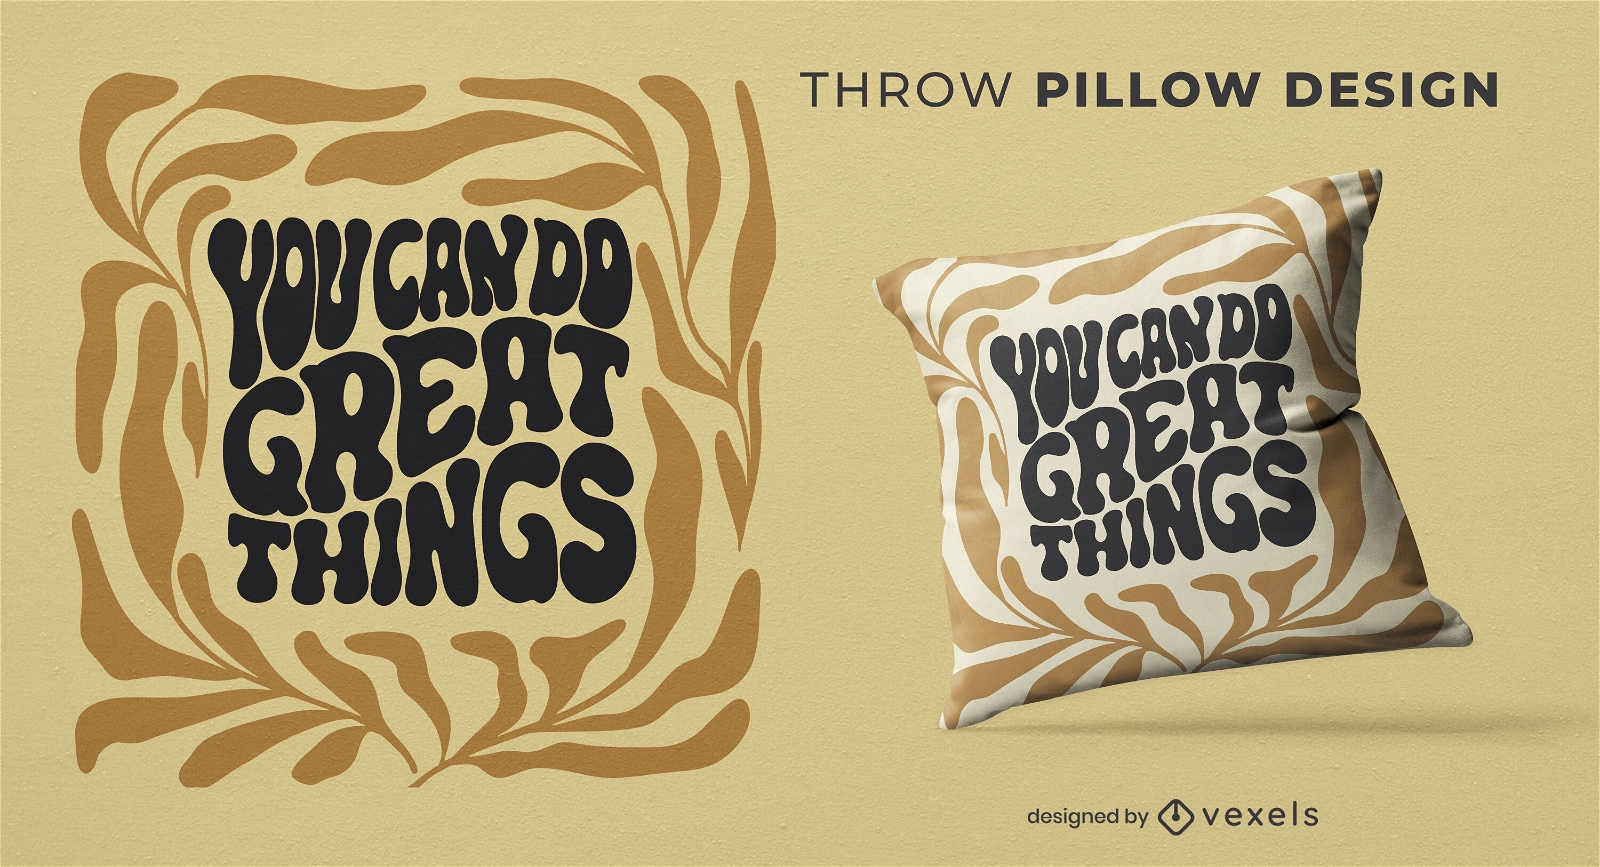 You can do great things throw pillow design